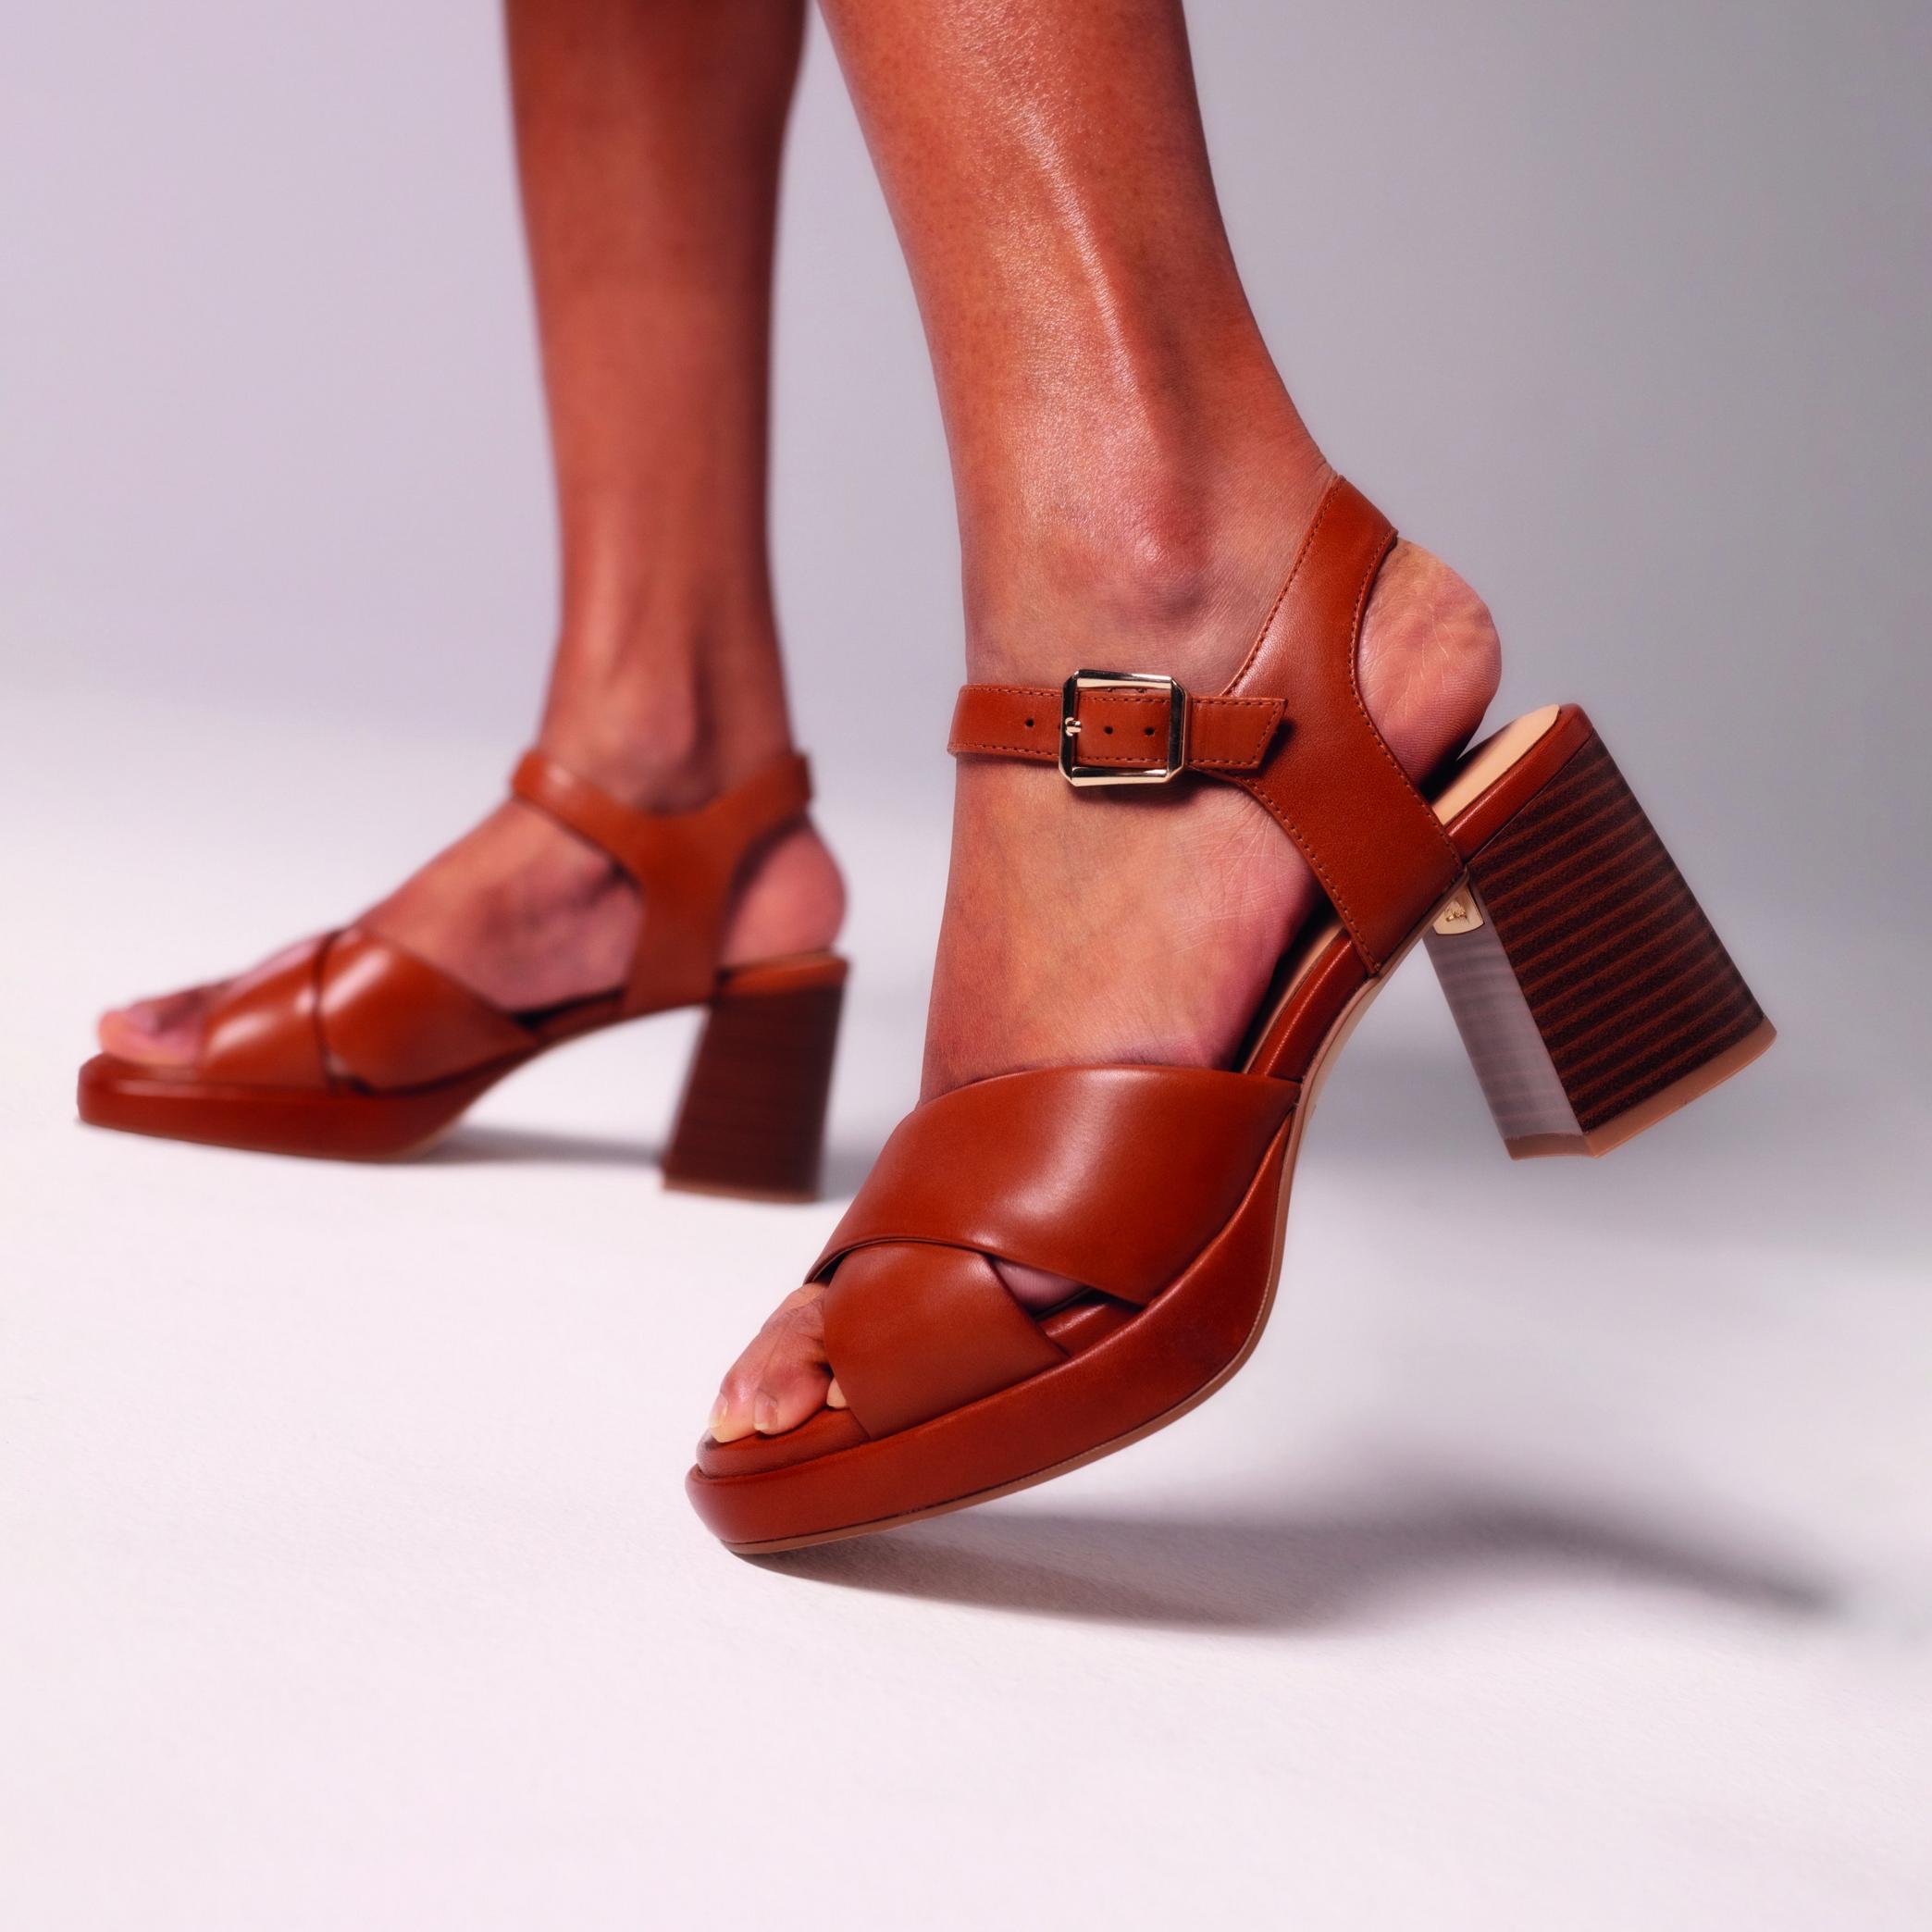 Ritzy 75 Rae Tan Leather Heeled Sandals, view 2 of 11